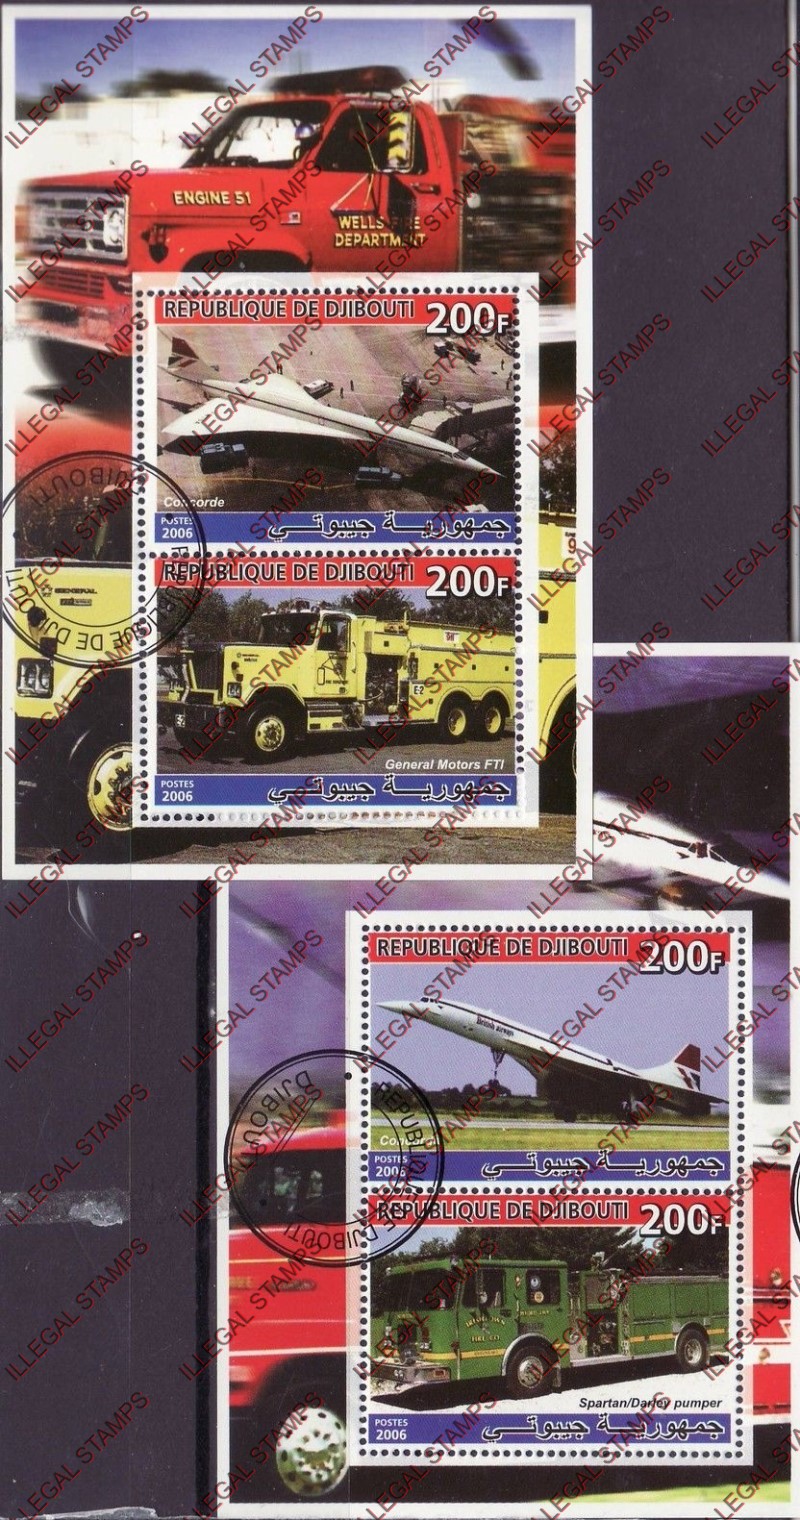 Djibouti 2006 Concorde and Fire Engines Illegal Stamp Souvenir Sheets of 2